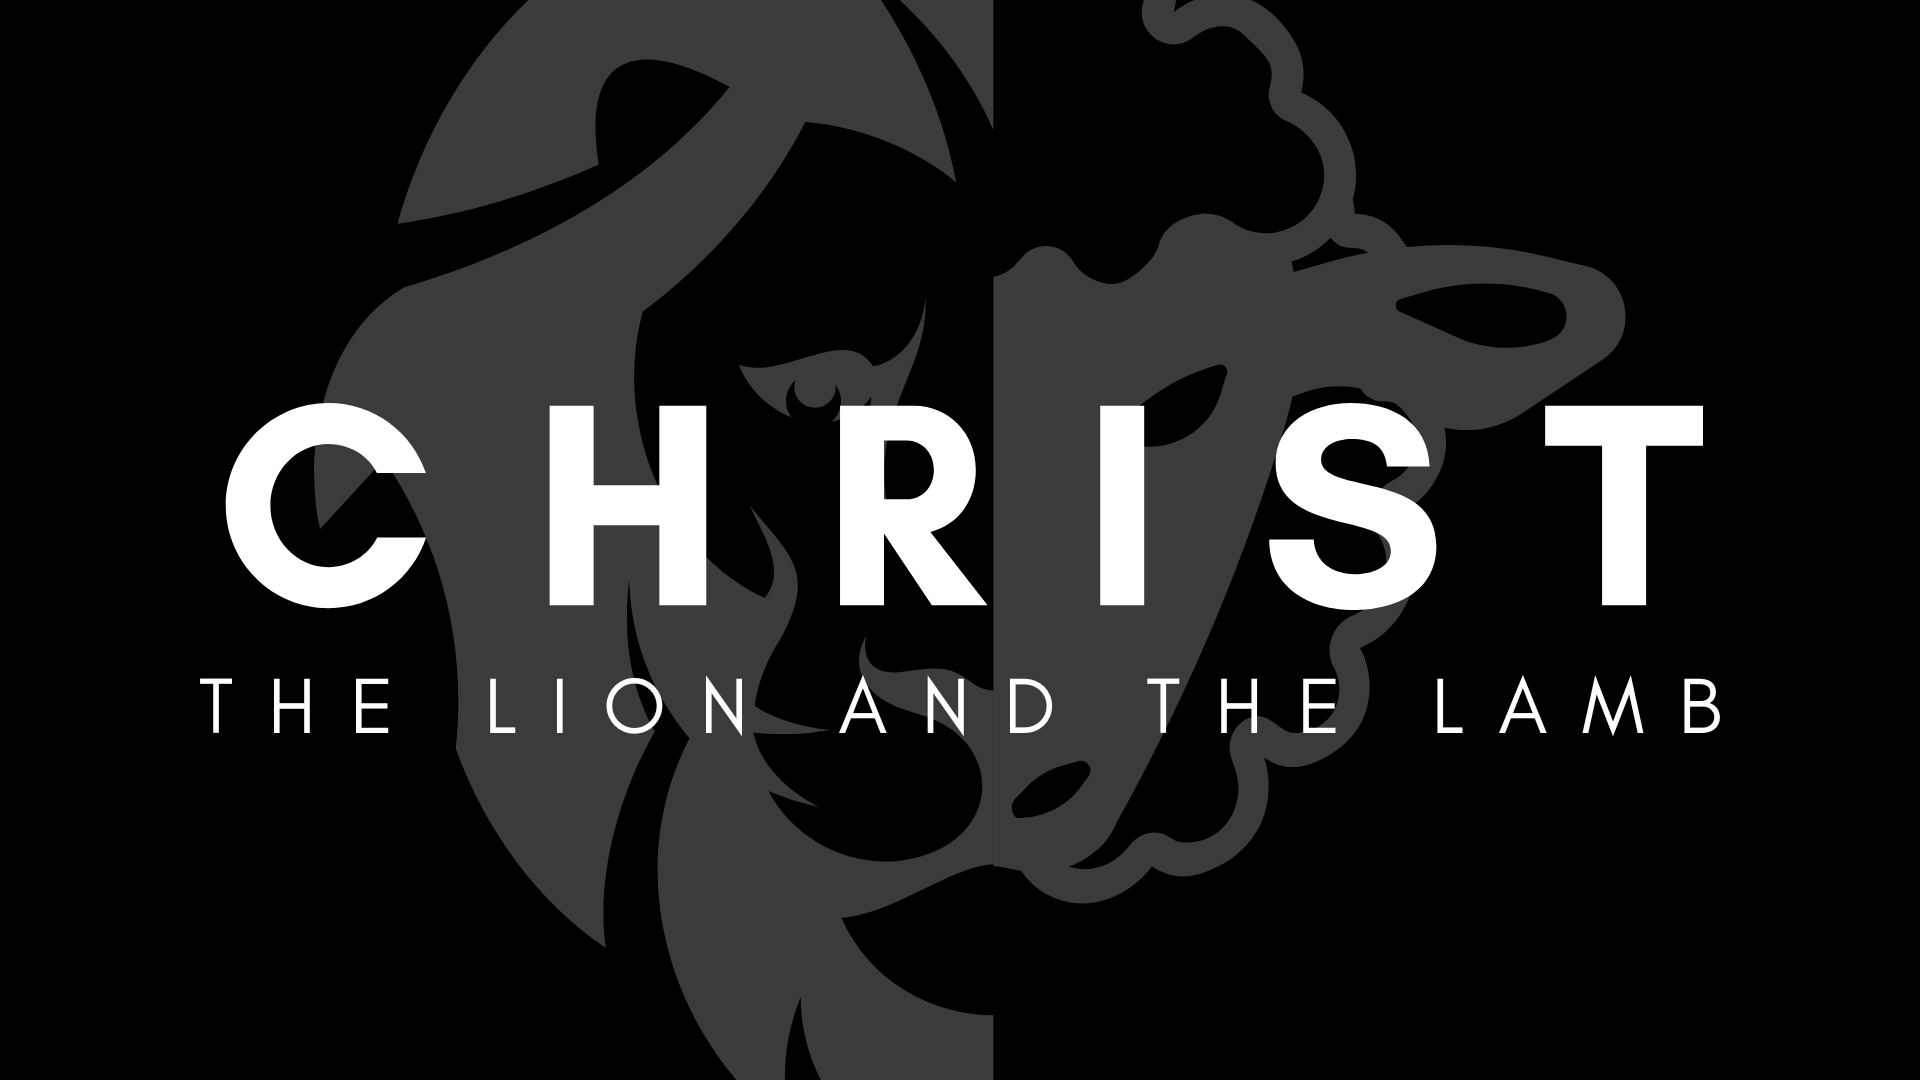 YC22 CHRIST: The Lion and The Lamb